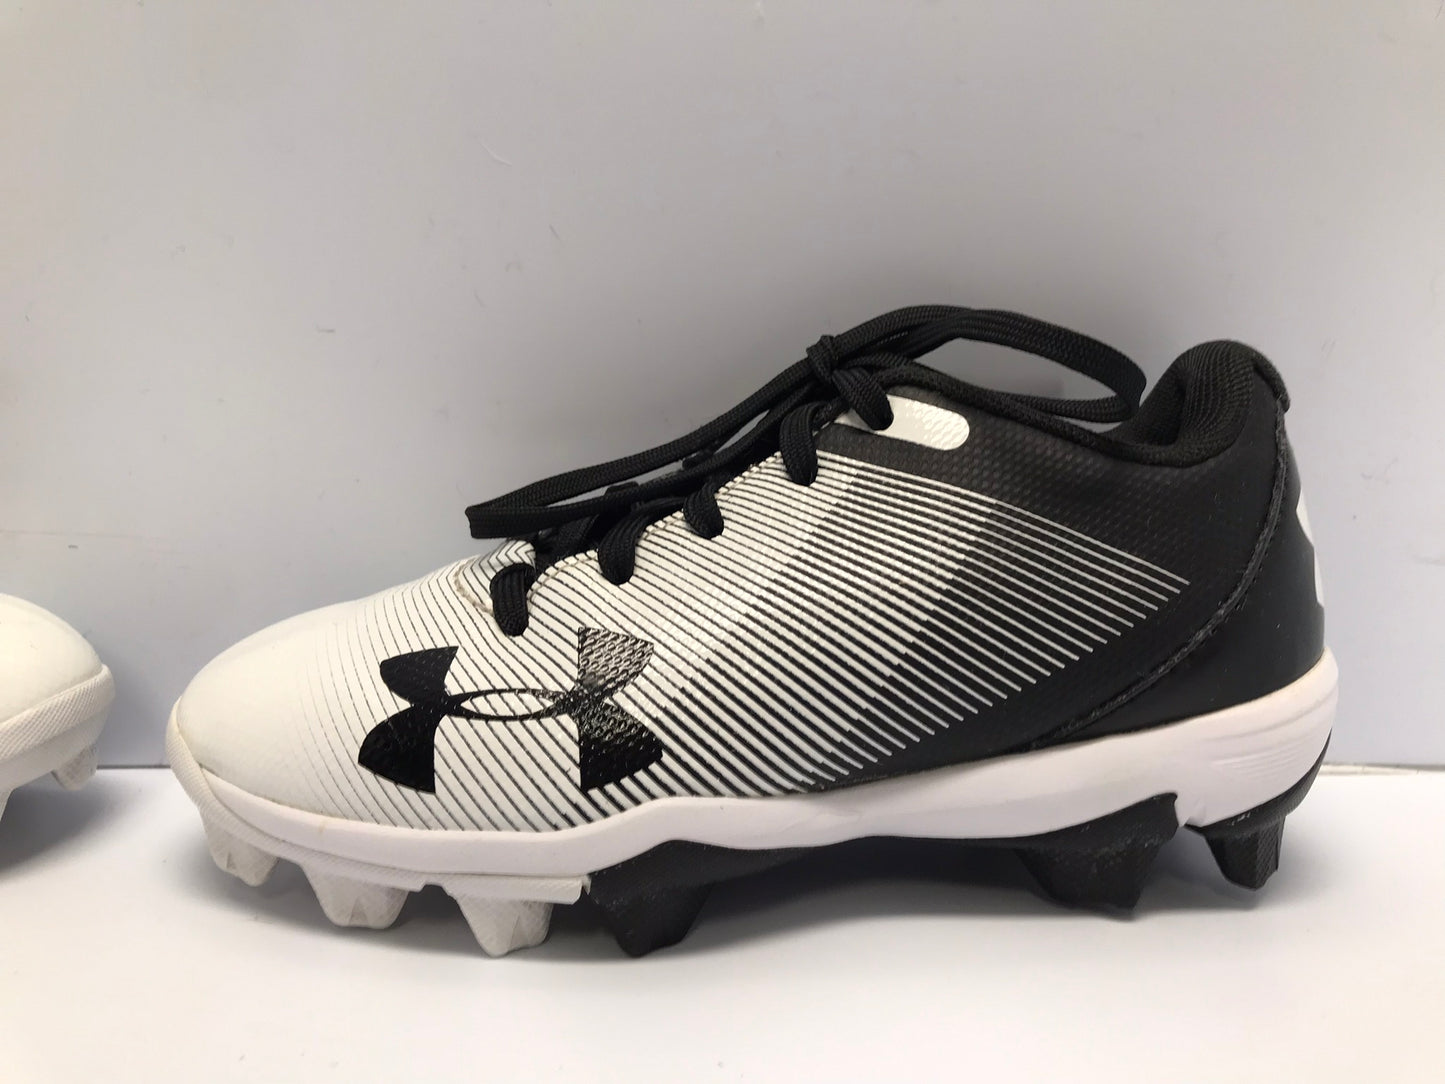 Baseball Shoes Cleats Child Size 12 Under Armour Black White Excellent